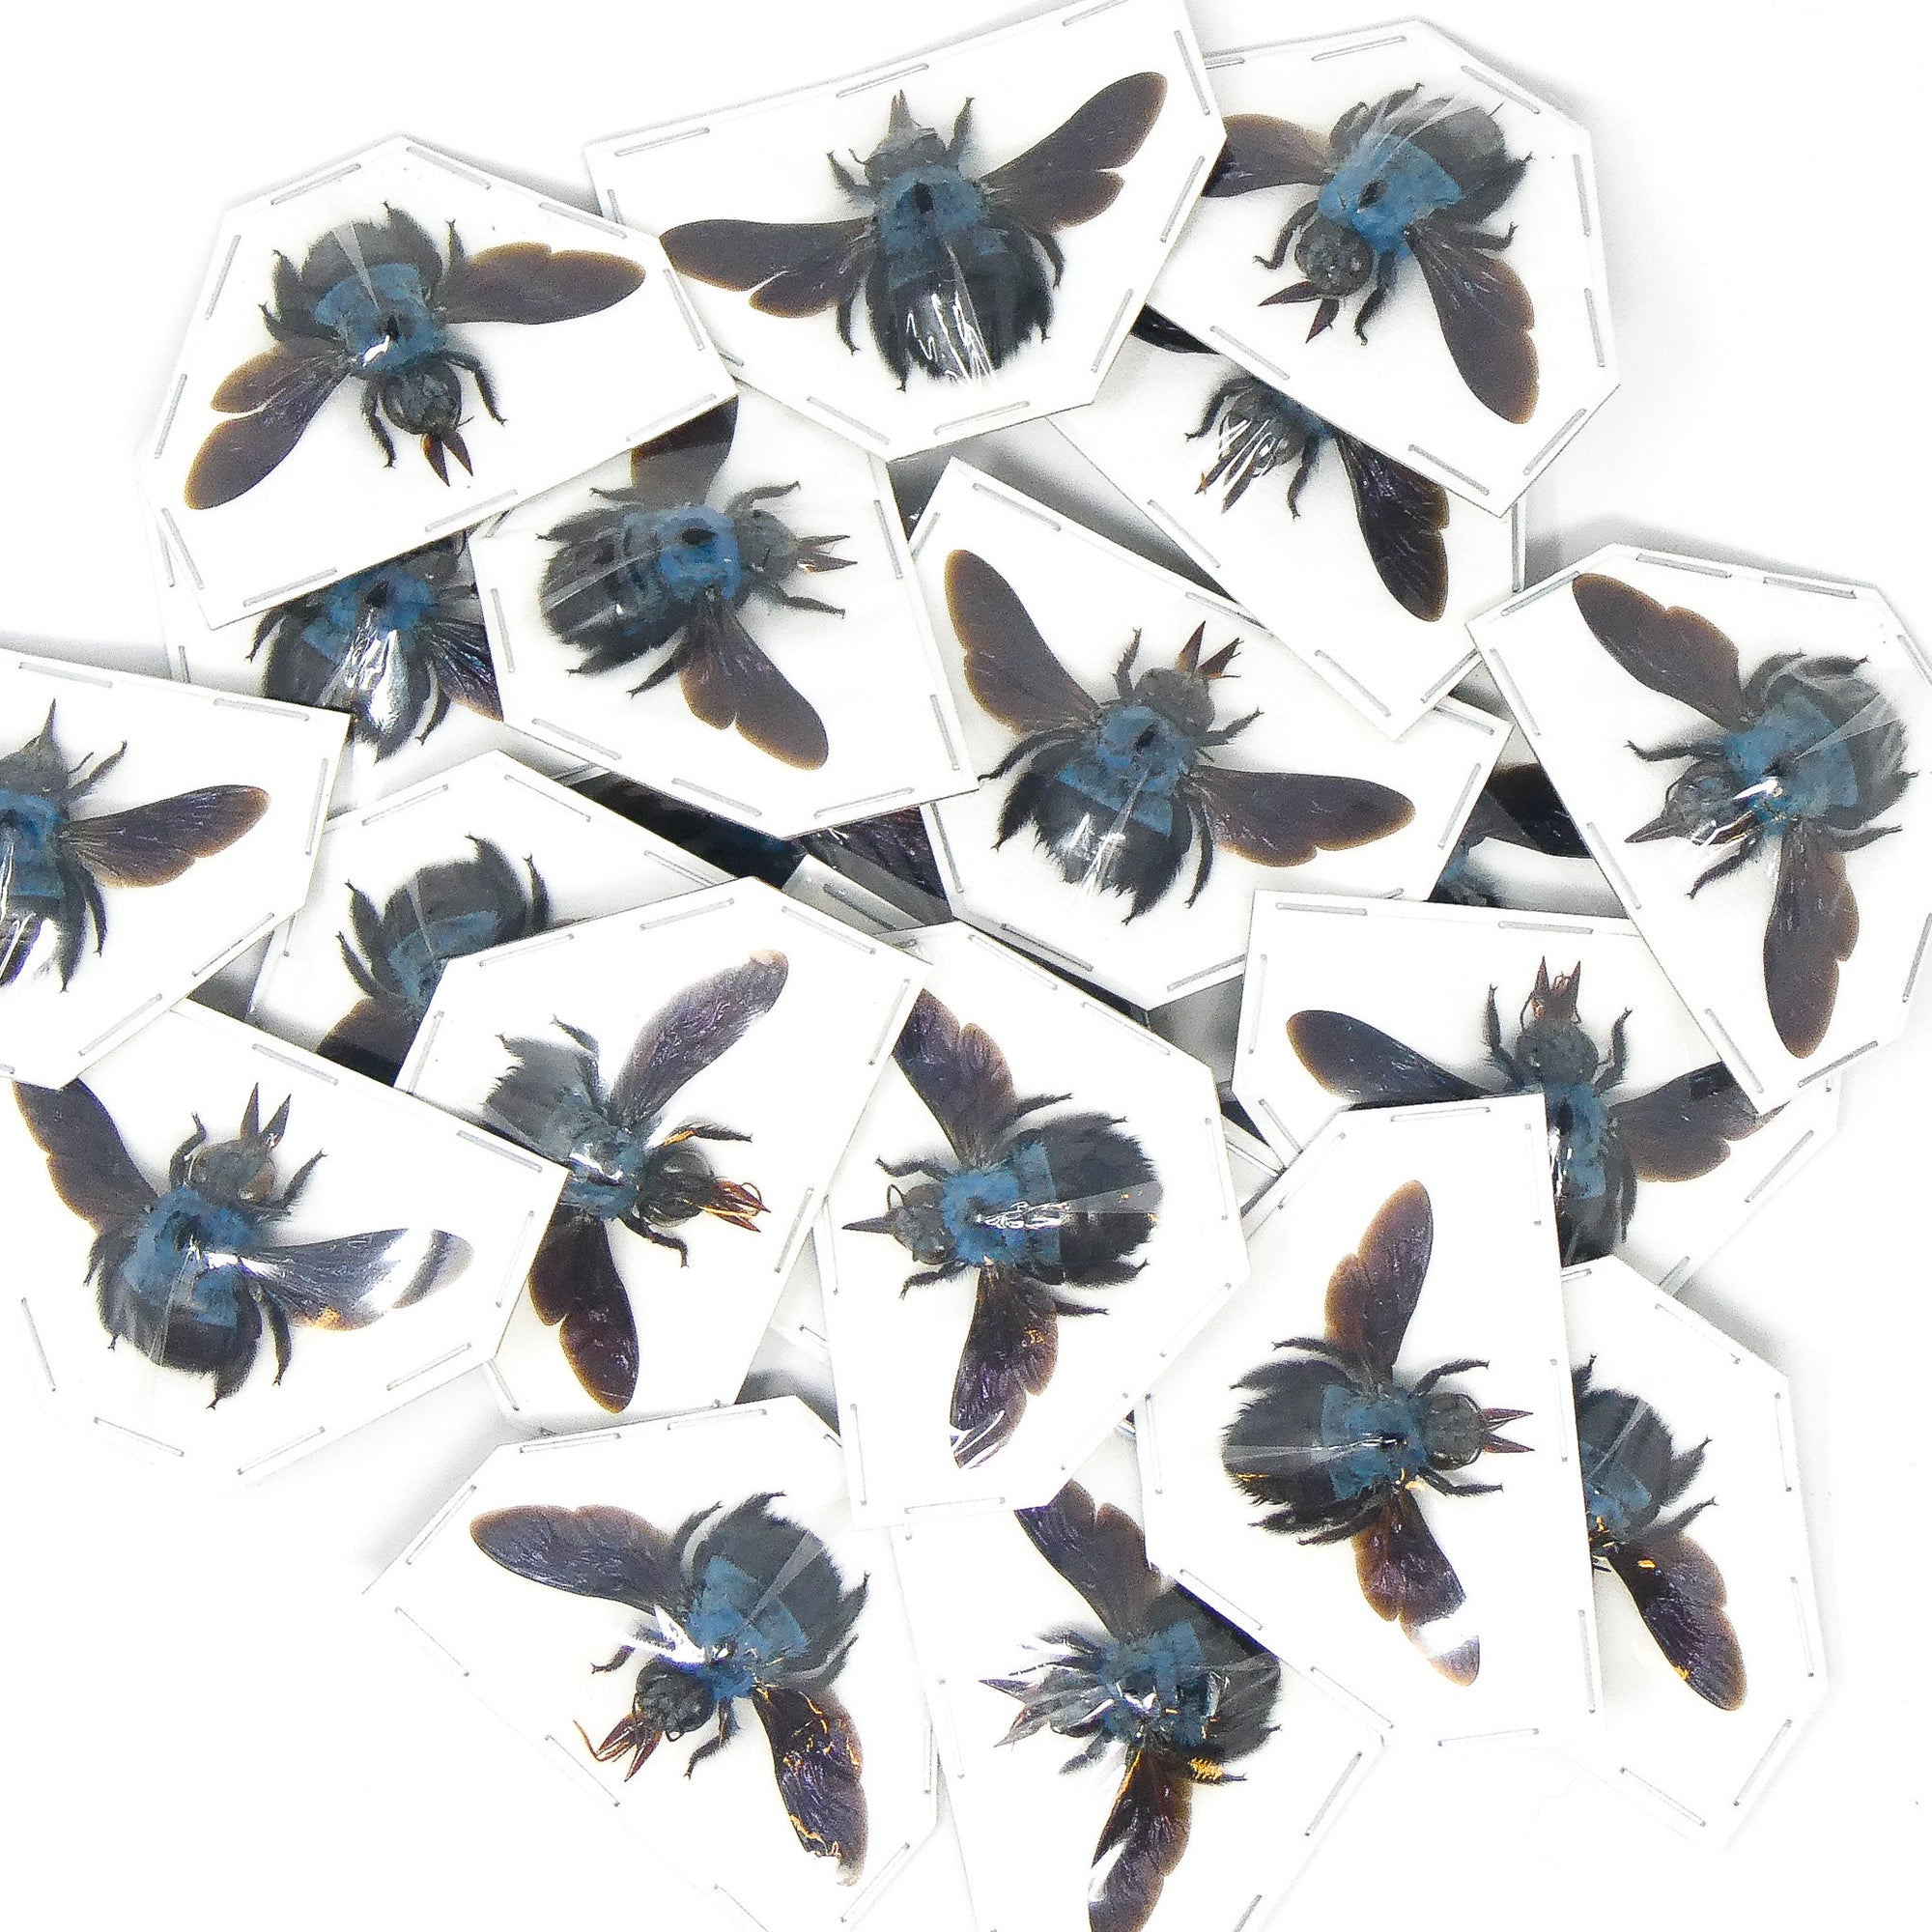 Pack of 10 Blue Carpenter Bees (Xylocopa caerulea) | A1 Spread Specimen | Dry-preserved Taxidermy